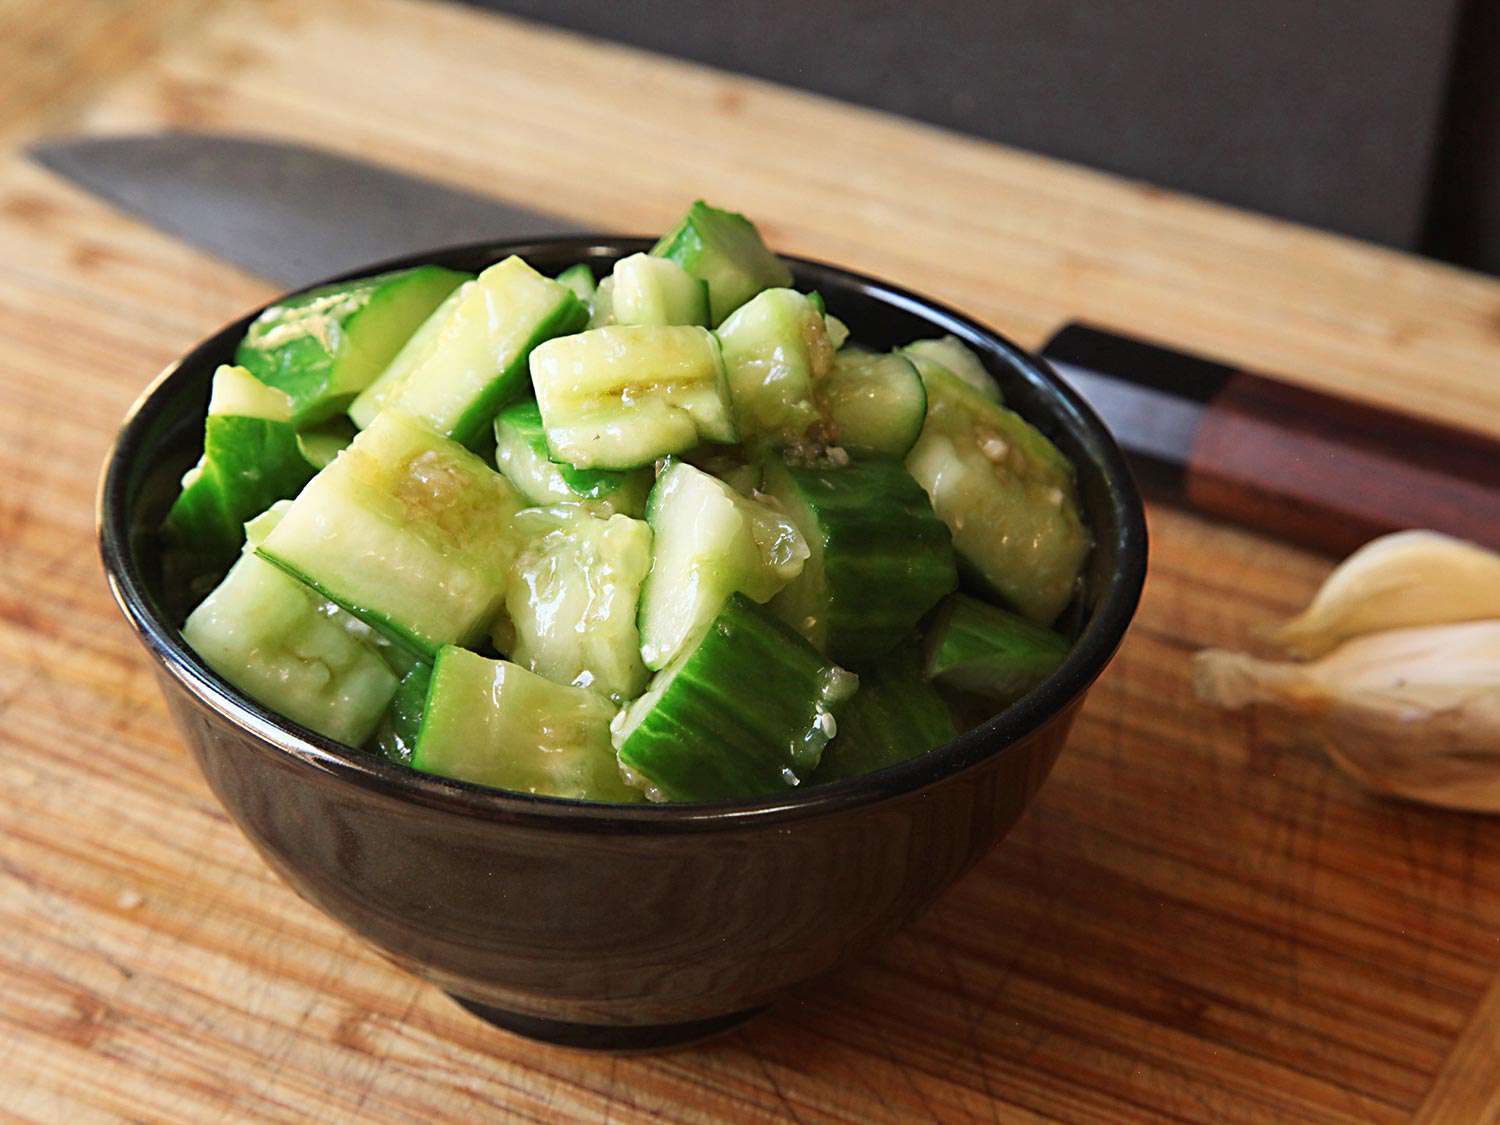 A bowl of crisp and tender cucumbers in a vinegary dressing.